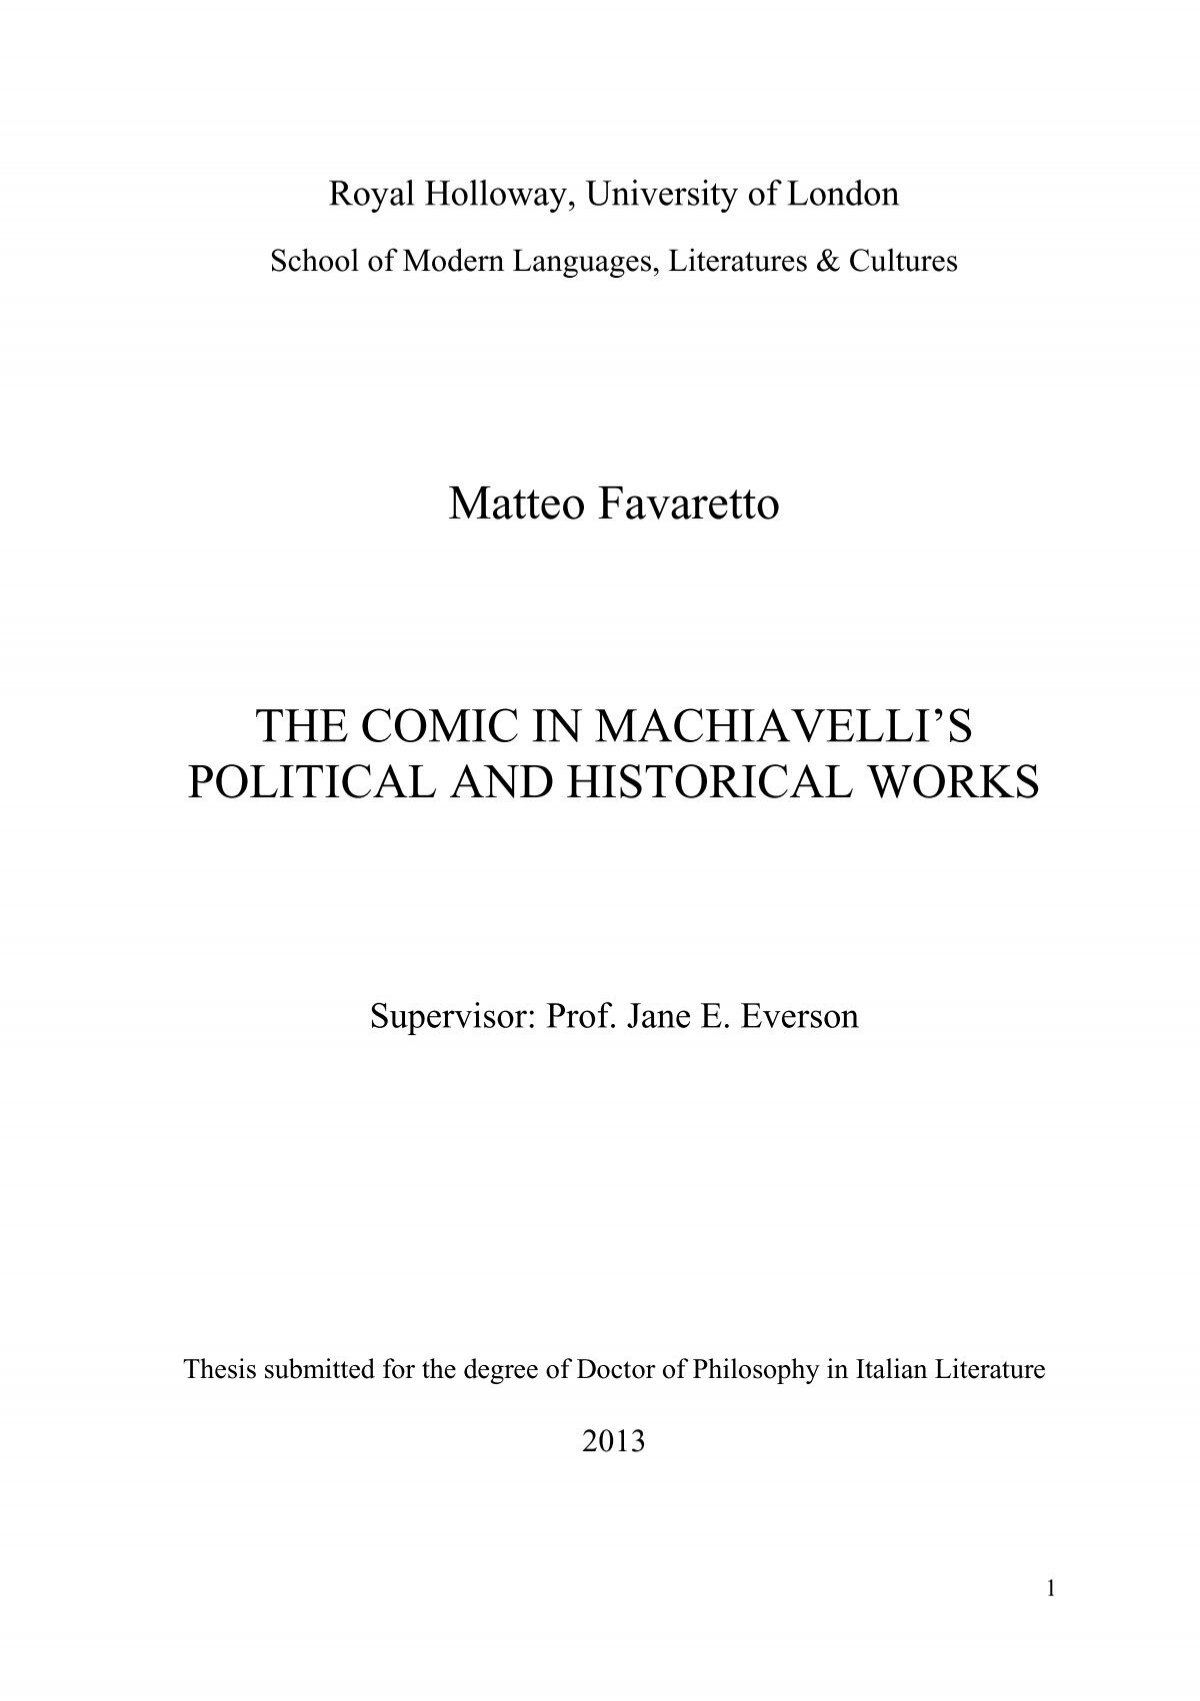 The Comic in Machiavelli's Political and Historical Works